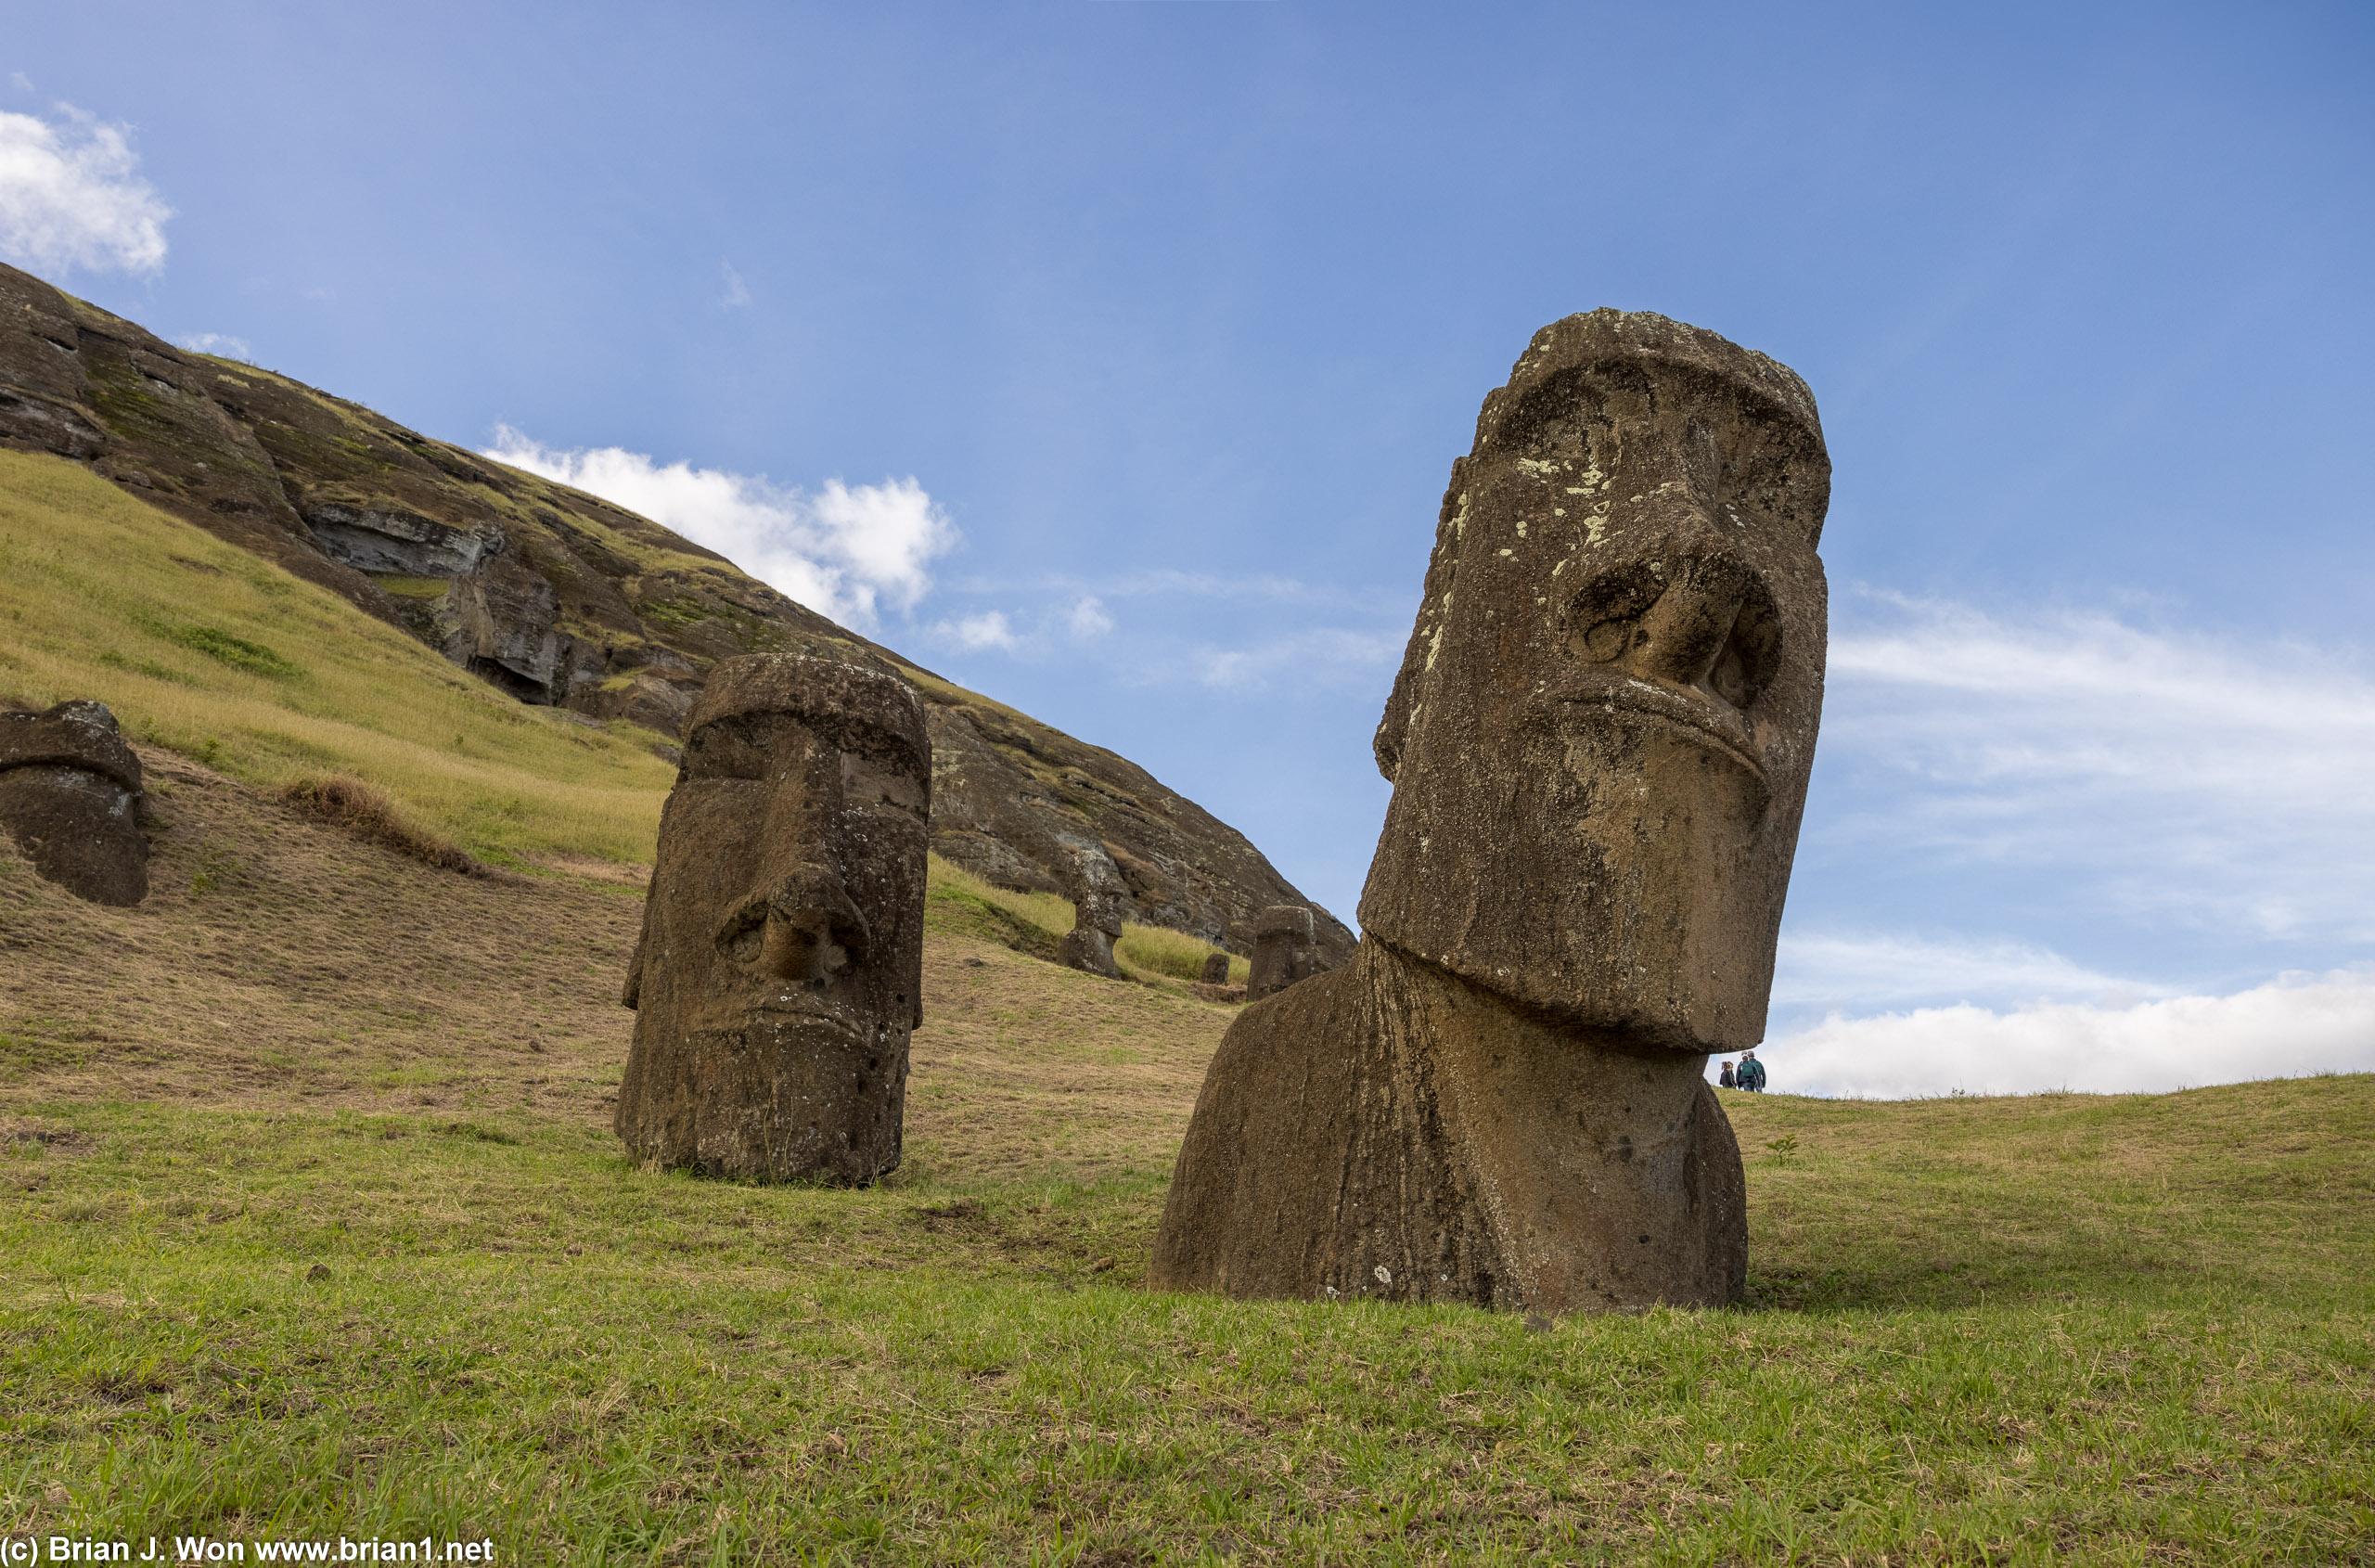 These two moai are famous, I think they were a National Geographic cover.